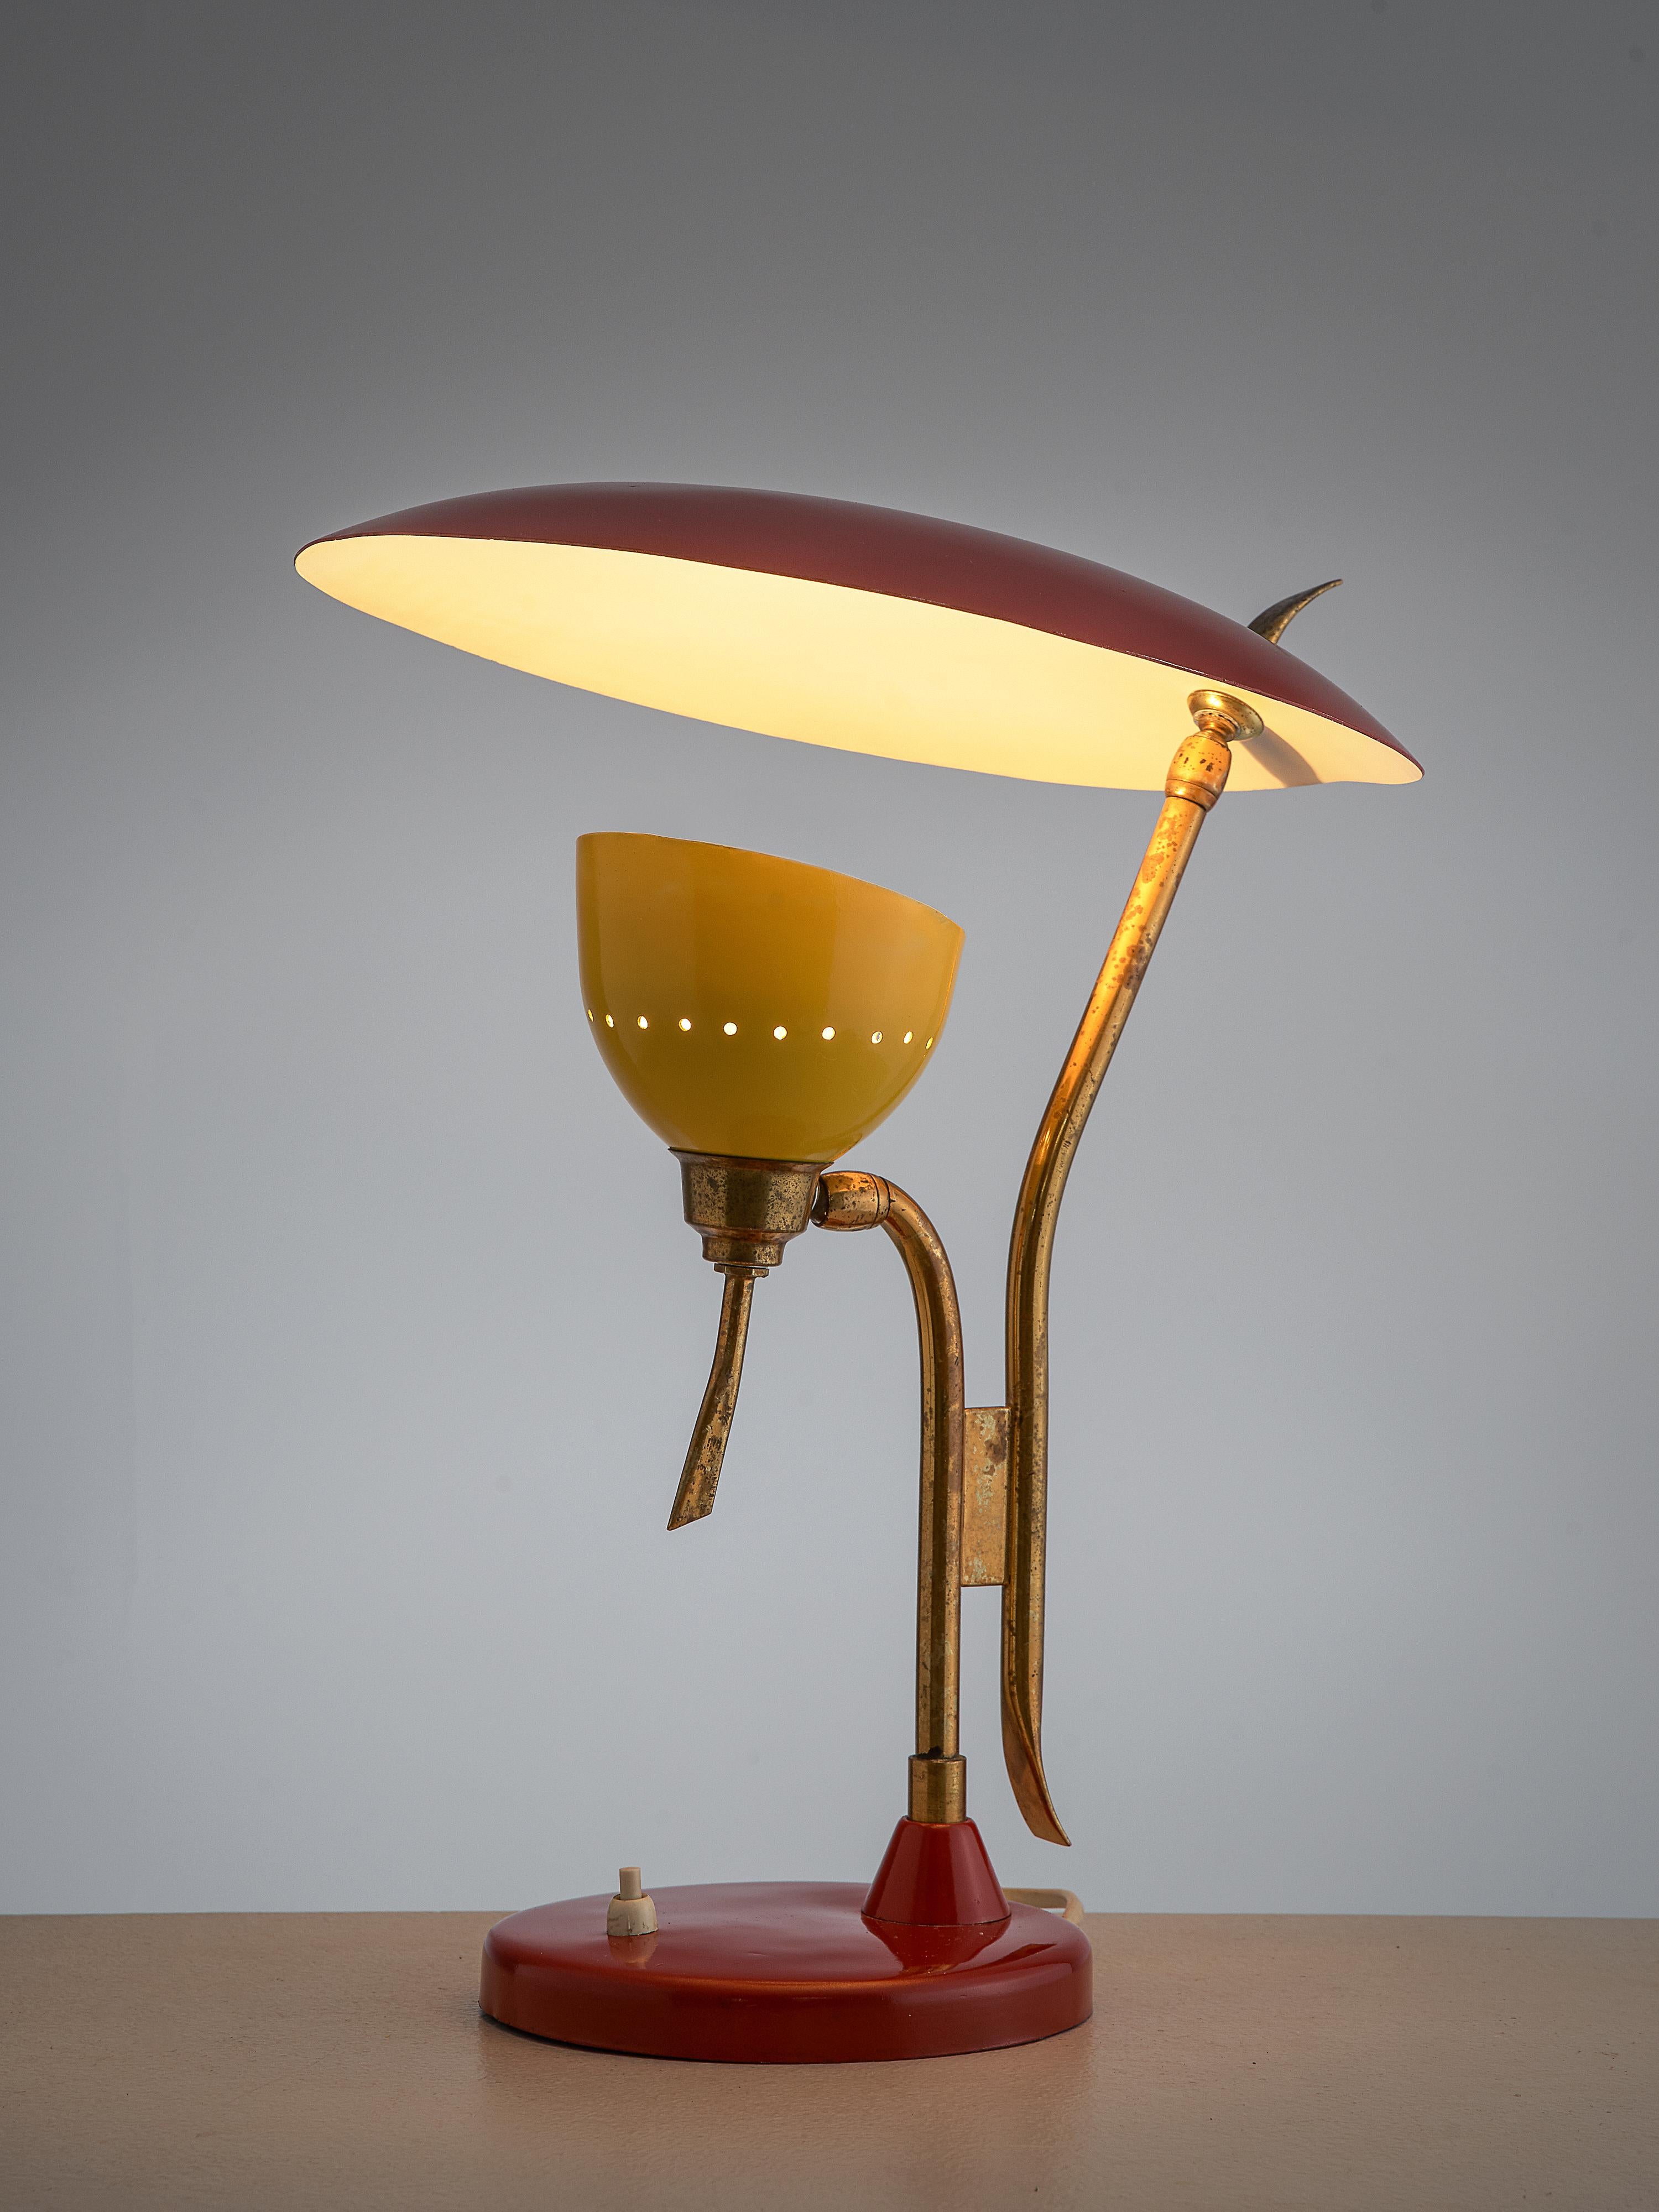 Lumen, table lamp, red and yellow metal, brass, Italy, 1950s

This colorful desk lamp convinces the eye through its well-balanced, organic design. Two shades rest on two brass stems. On the round base in red color a switch can be found. One small